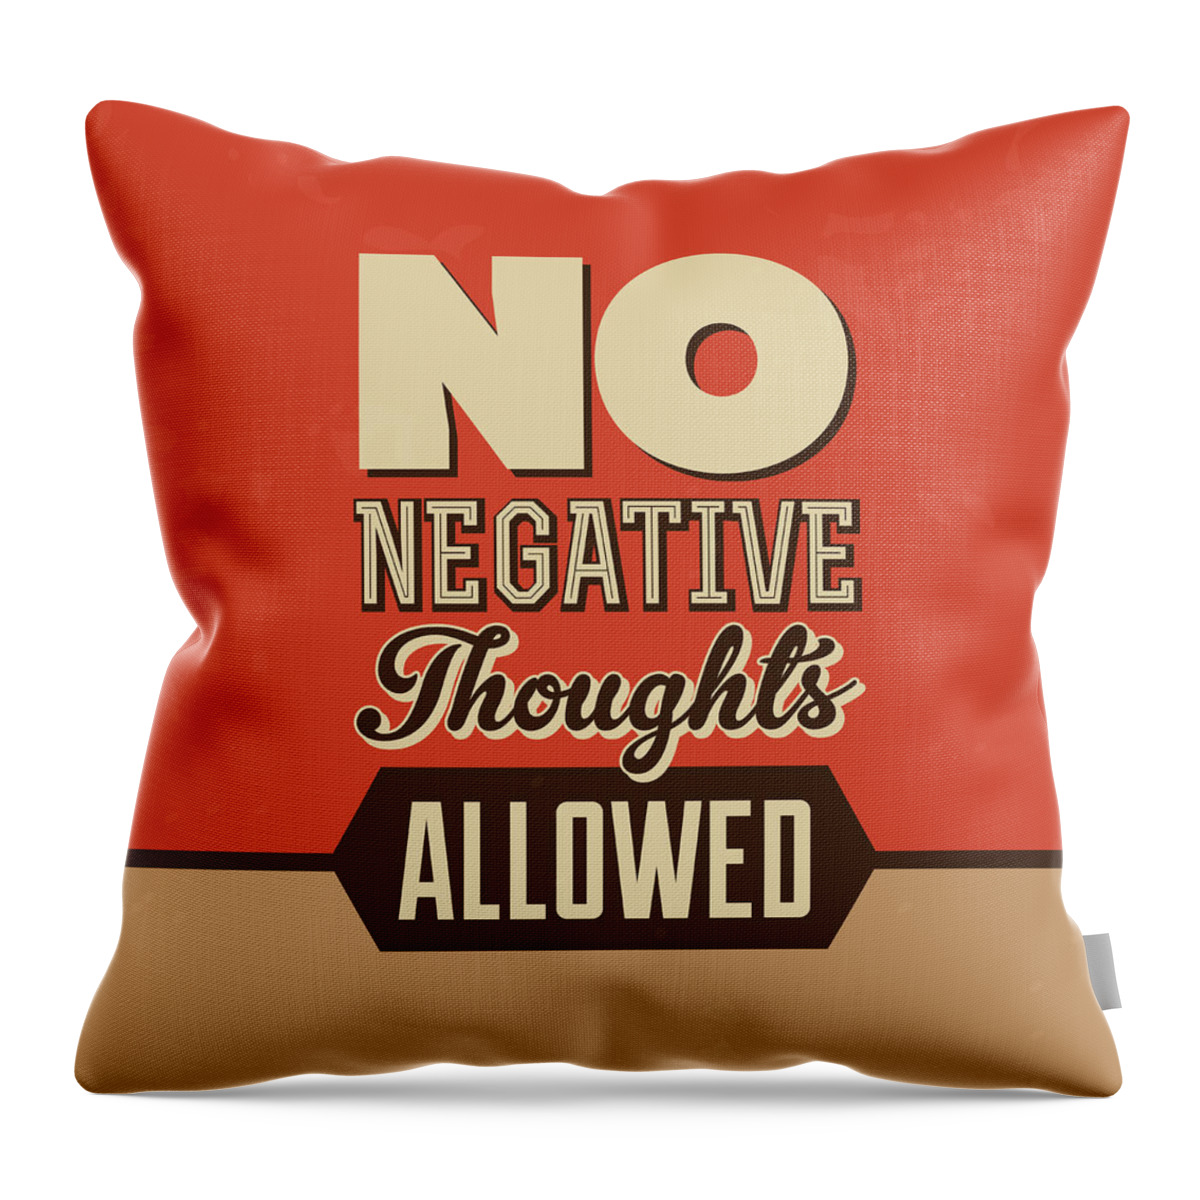  Throw Pillow featuring the digital art No Negative Thoughts Allowed by Naxart Studio